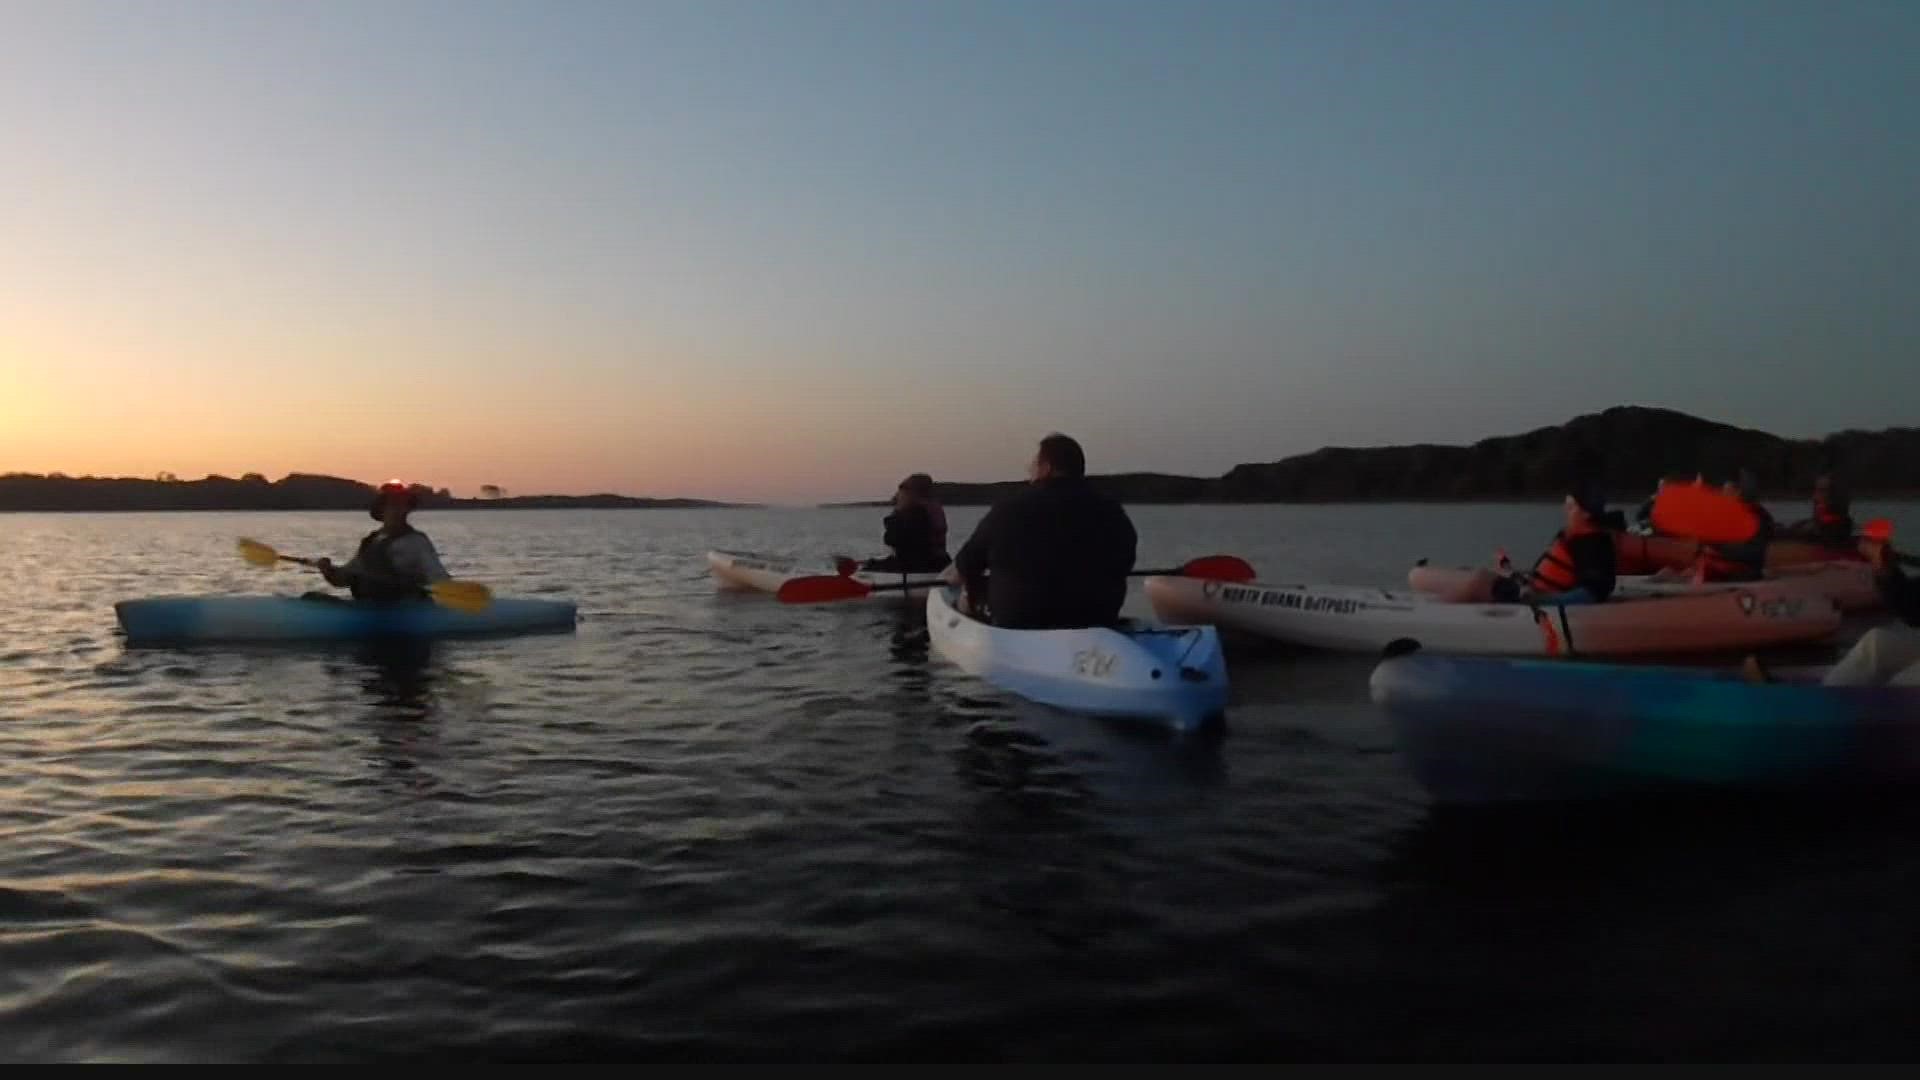 You've probably heard of bioluminescence, but did you know you can take a kayak tour on the First Coast to see it?